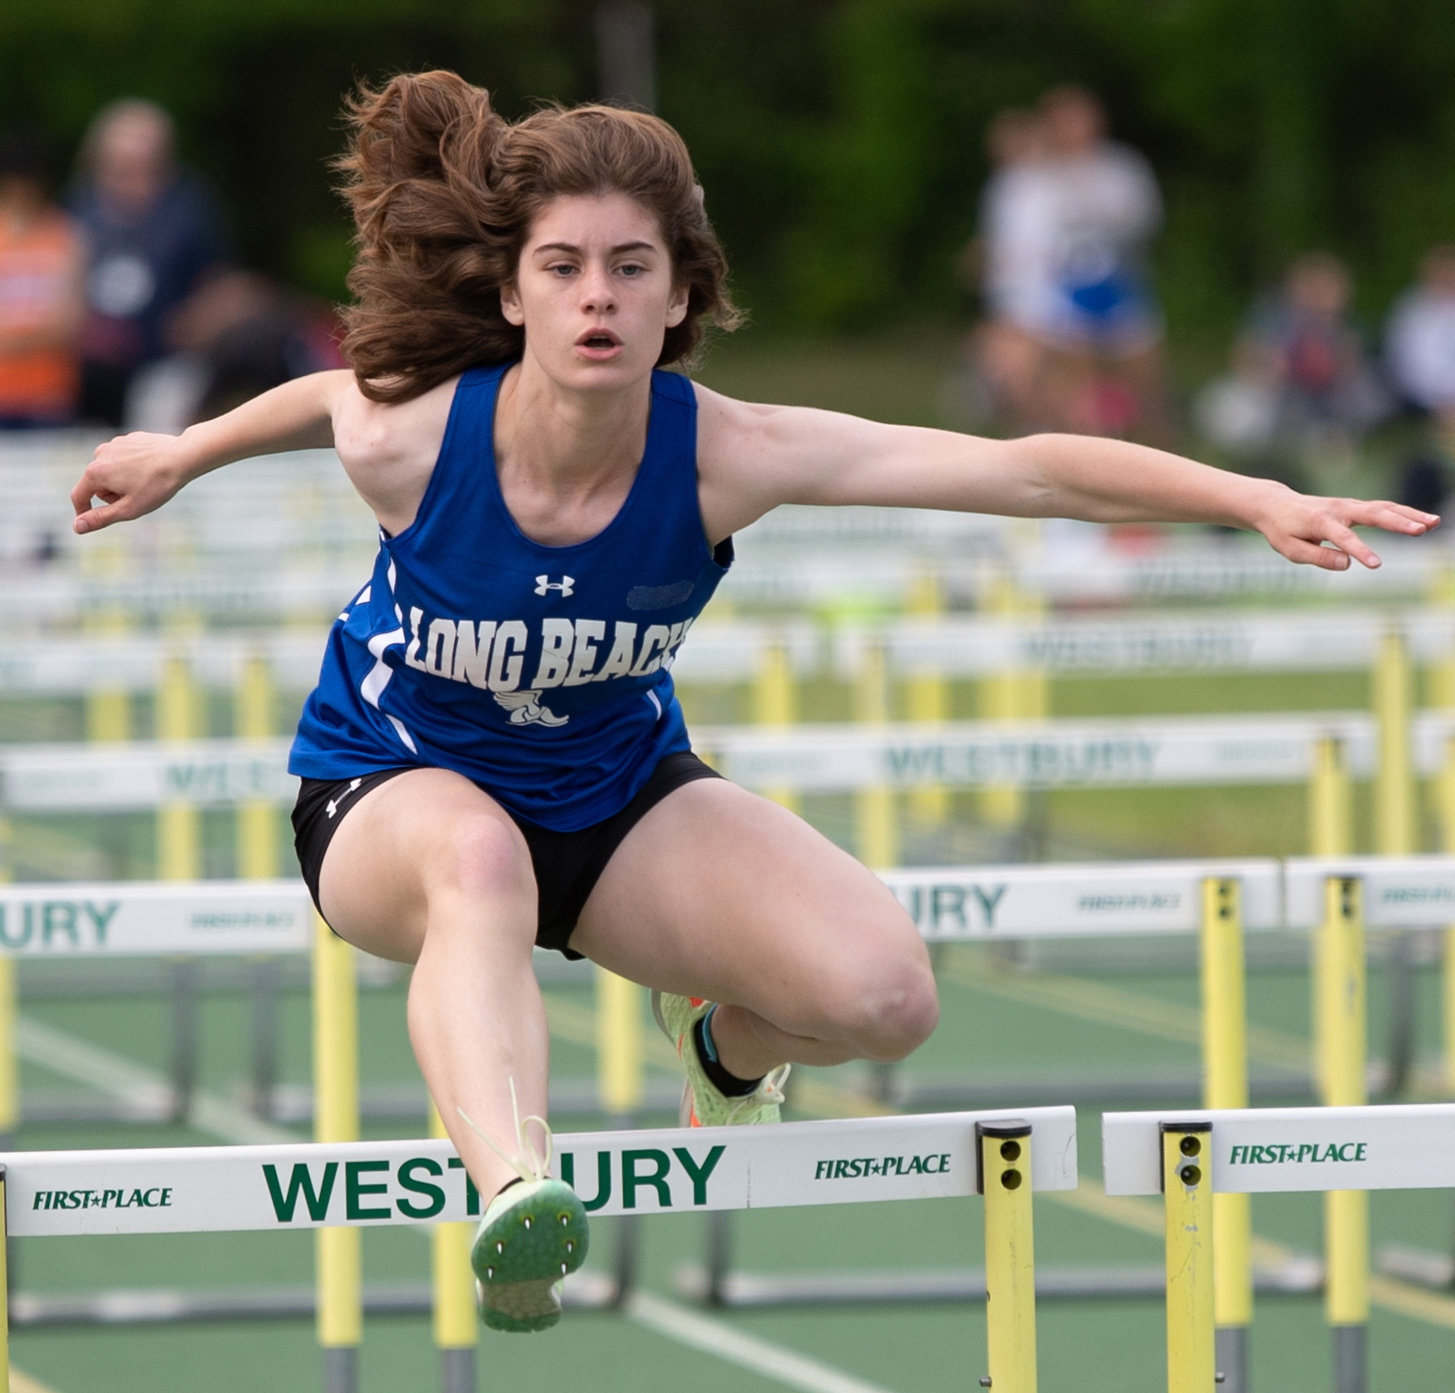 Sophomore Kayla Carney was Long Beach’s top hurdler and Division 2A runner-up in the 100 and 400 hurdle events.